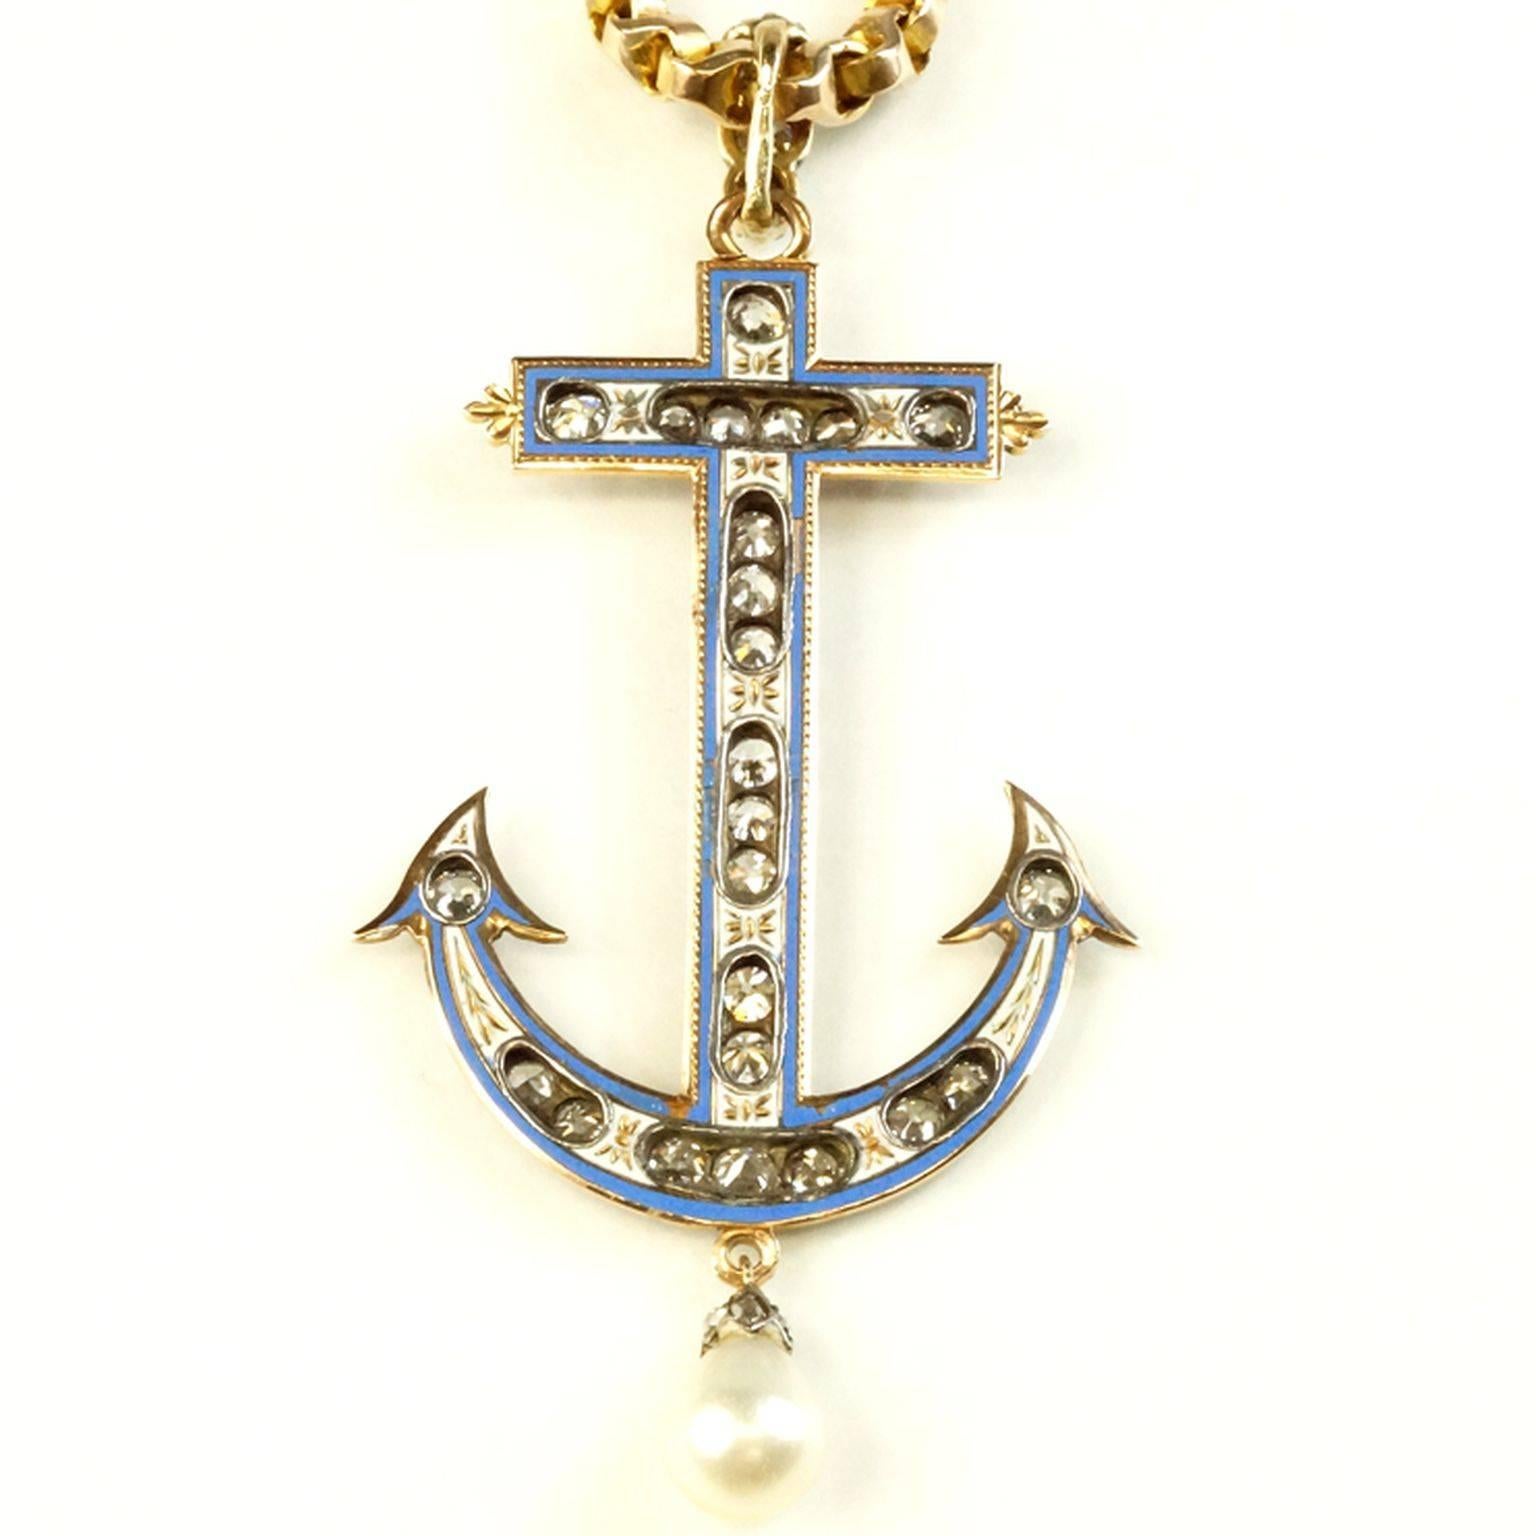 Amazing C. 1860 white gold and yellow gold with blue enamel diamond
anchor pendant. Approximately 2.00 ct. Old European cut diamonds with beautiful hand engraving front and back. Natural pearl with diamond top drops from the bottom.
Measures